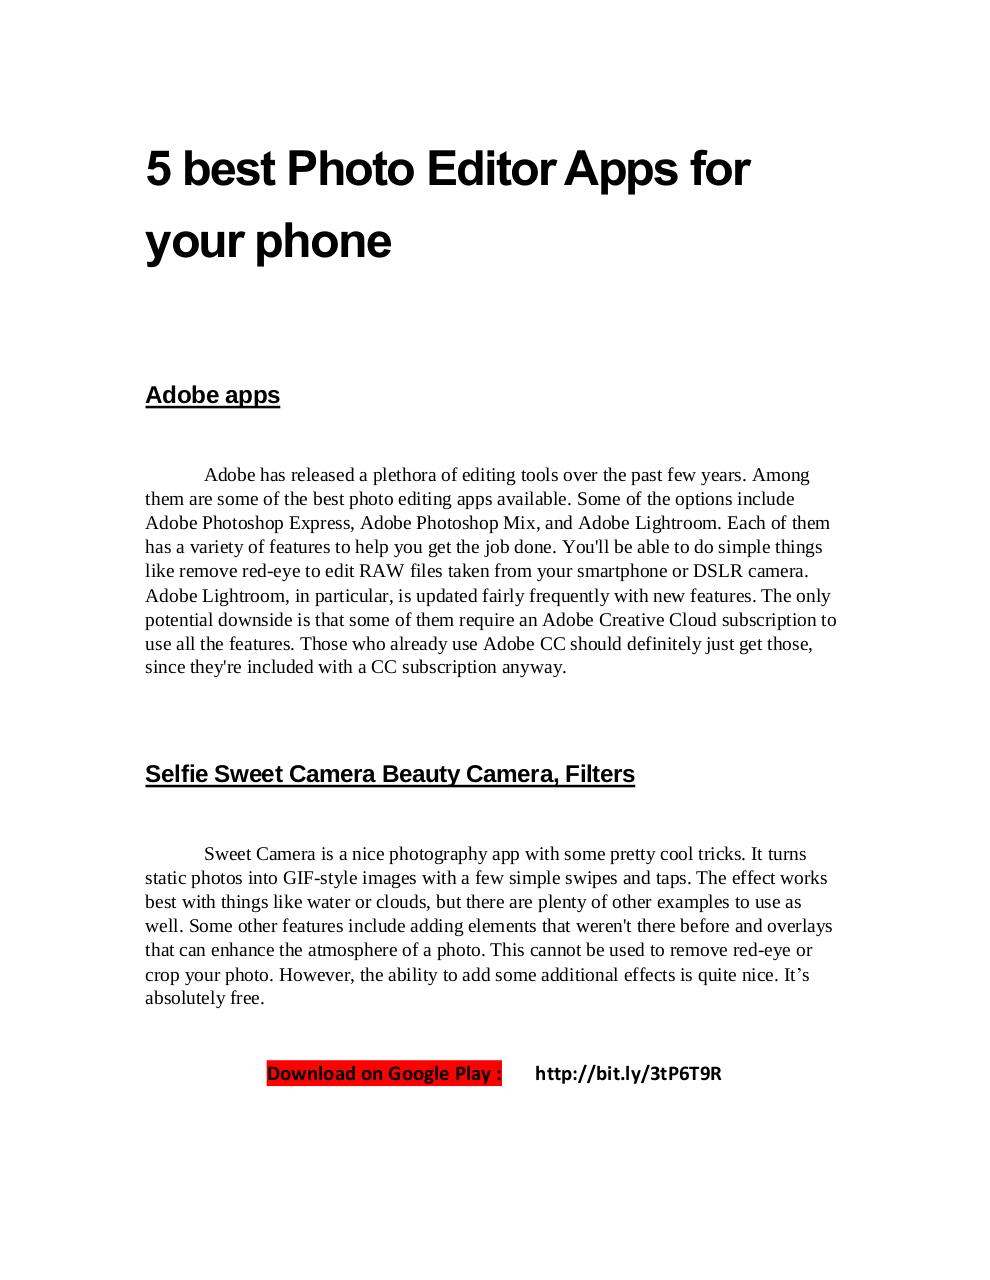 5 best Photo Editor Apps for Android.pdf - page 1/3